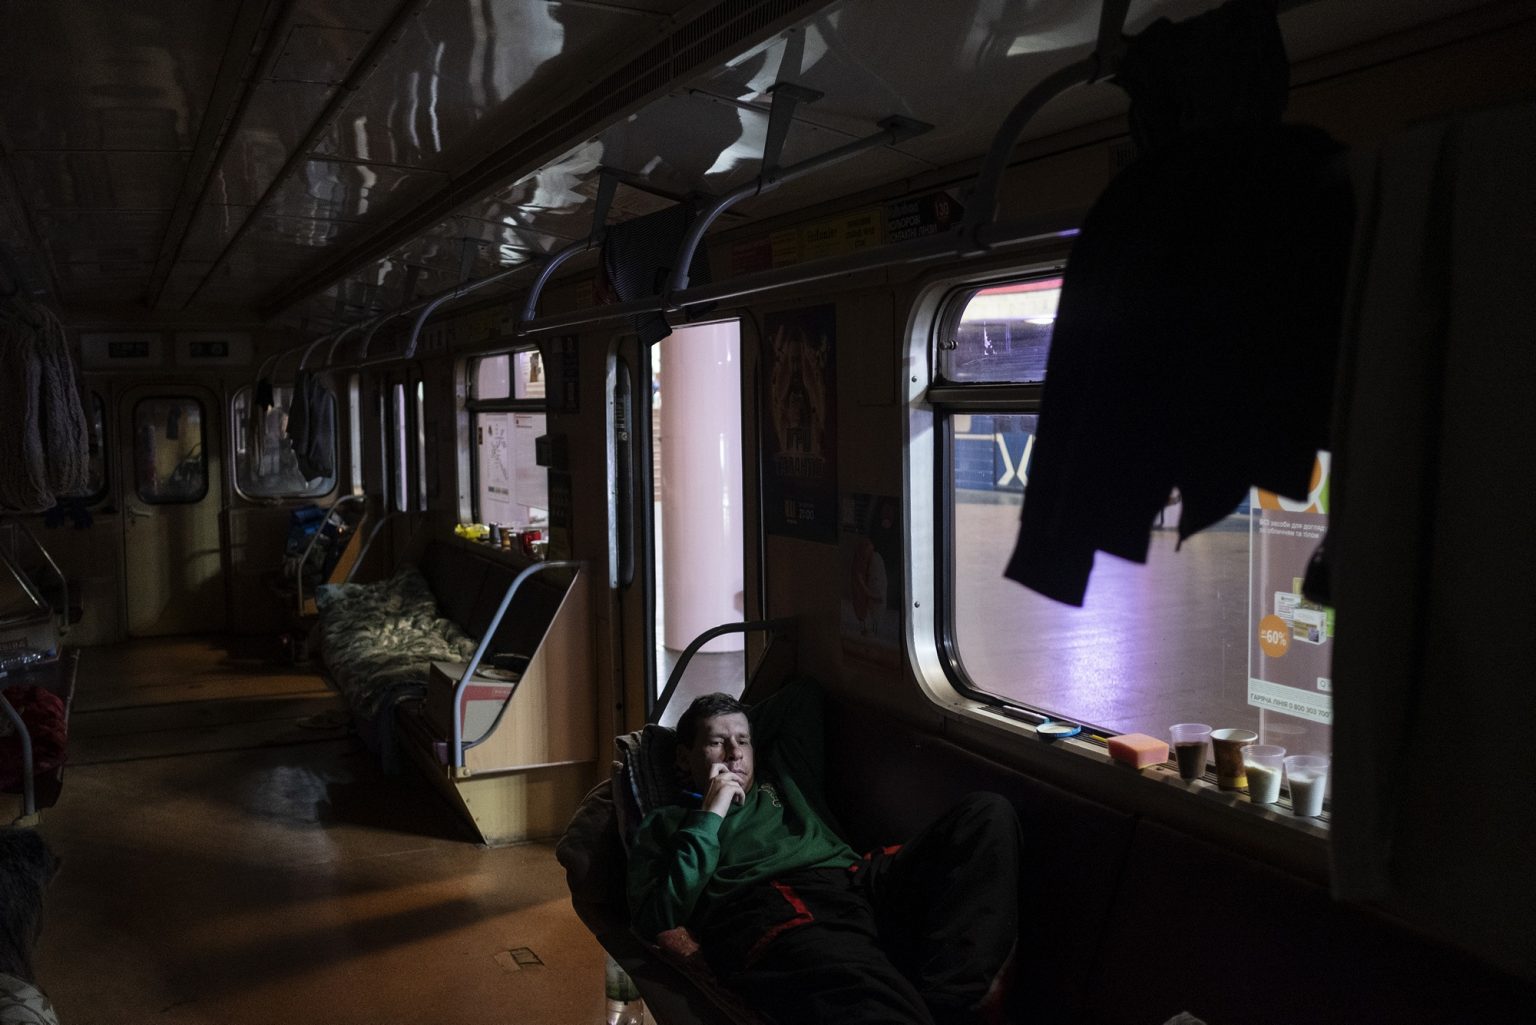 01559552 Kharkiv, Ukraine - March 25th 2022 - Saltivka residential district, a man sitting inside a subway car used as a refuge by citizens who did not want or could not leave the city under attack by the Russian army.
Ph.Giulio Piscitelli                  As Russia invades Ukraine, thousands of Ukrainians are fleeing the country to find shelter in bordering countries.
---------
Con l'invasione russa ai danni dell'Ucraina, migliaia di ucraini sono in fuga dalla nazione d'origine per cercare rifugio nelle nazioni confinanti. *** SPECIAL   FEE   APPLIES *** *** Local Caption *** 01559552